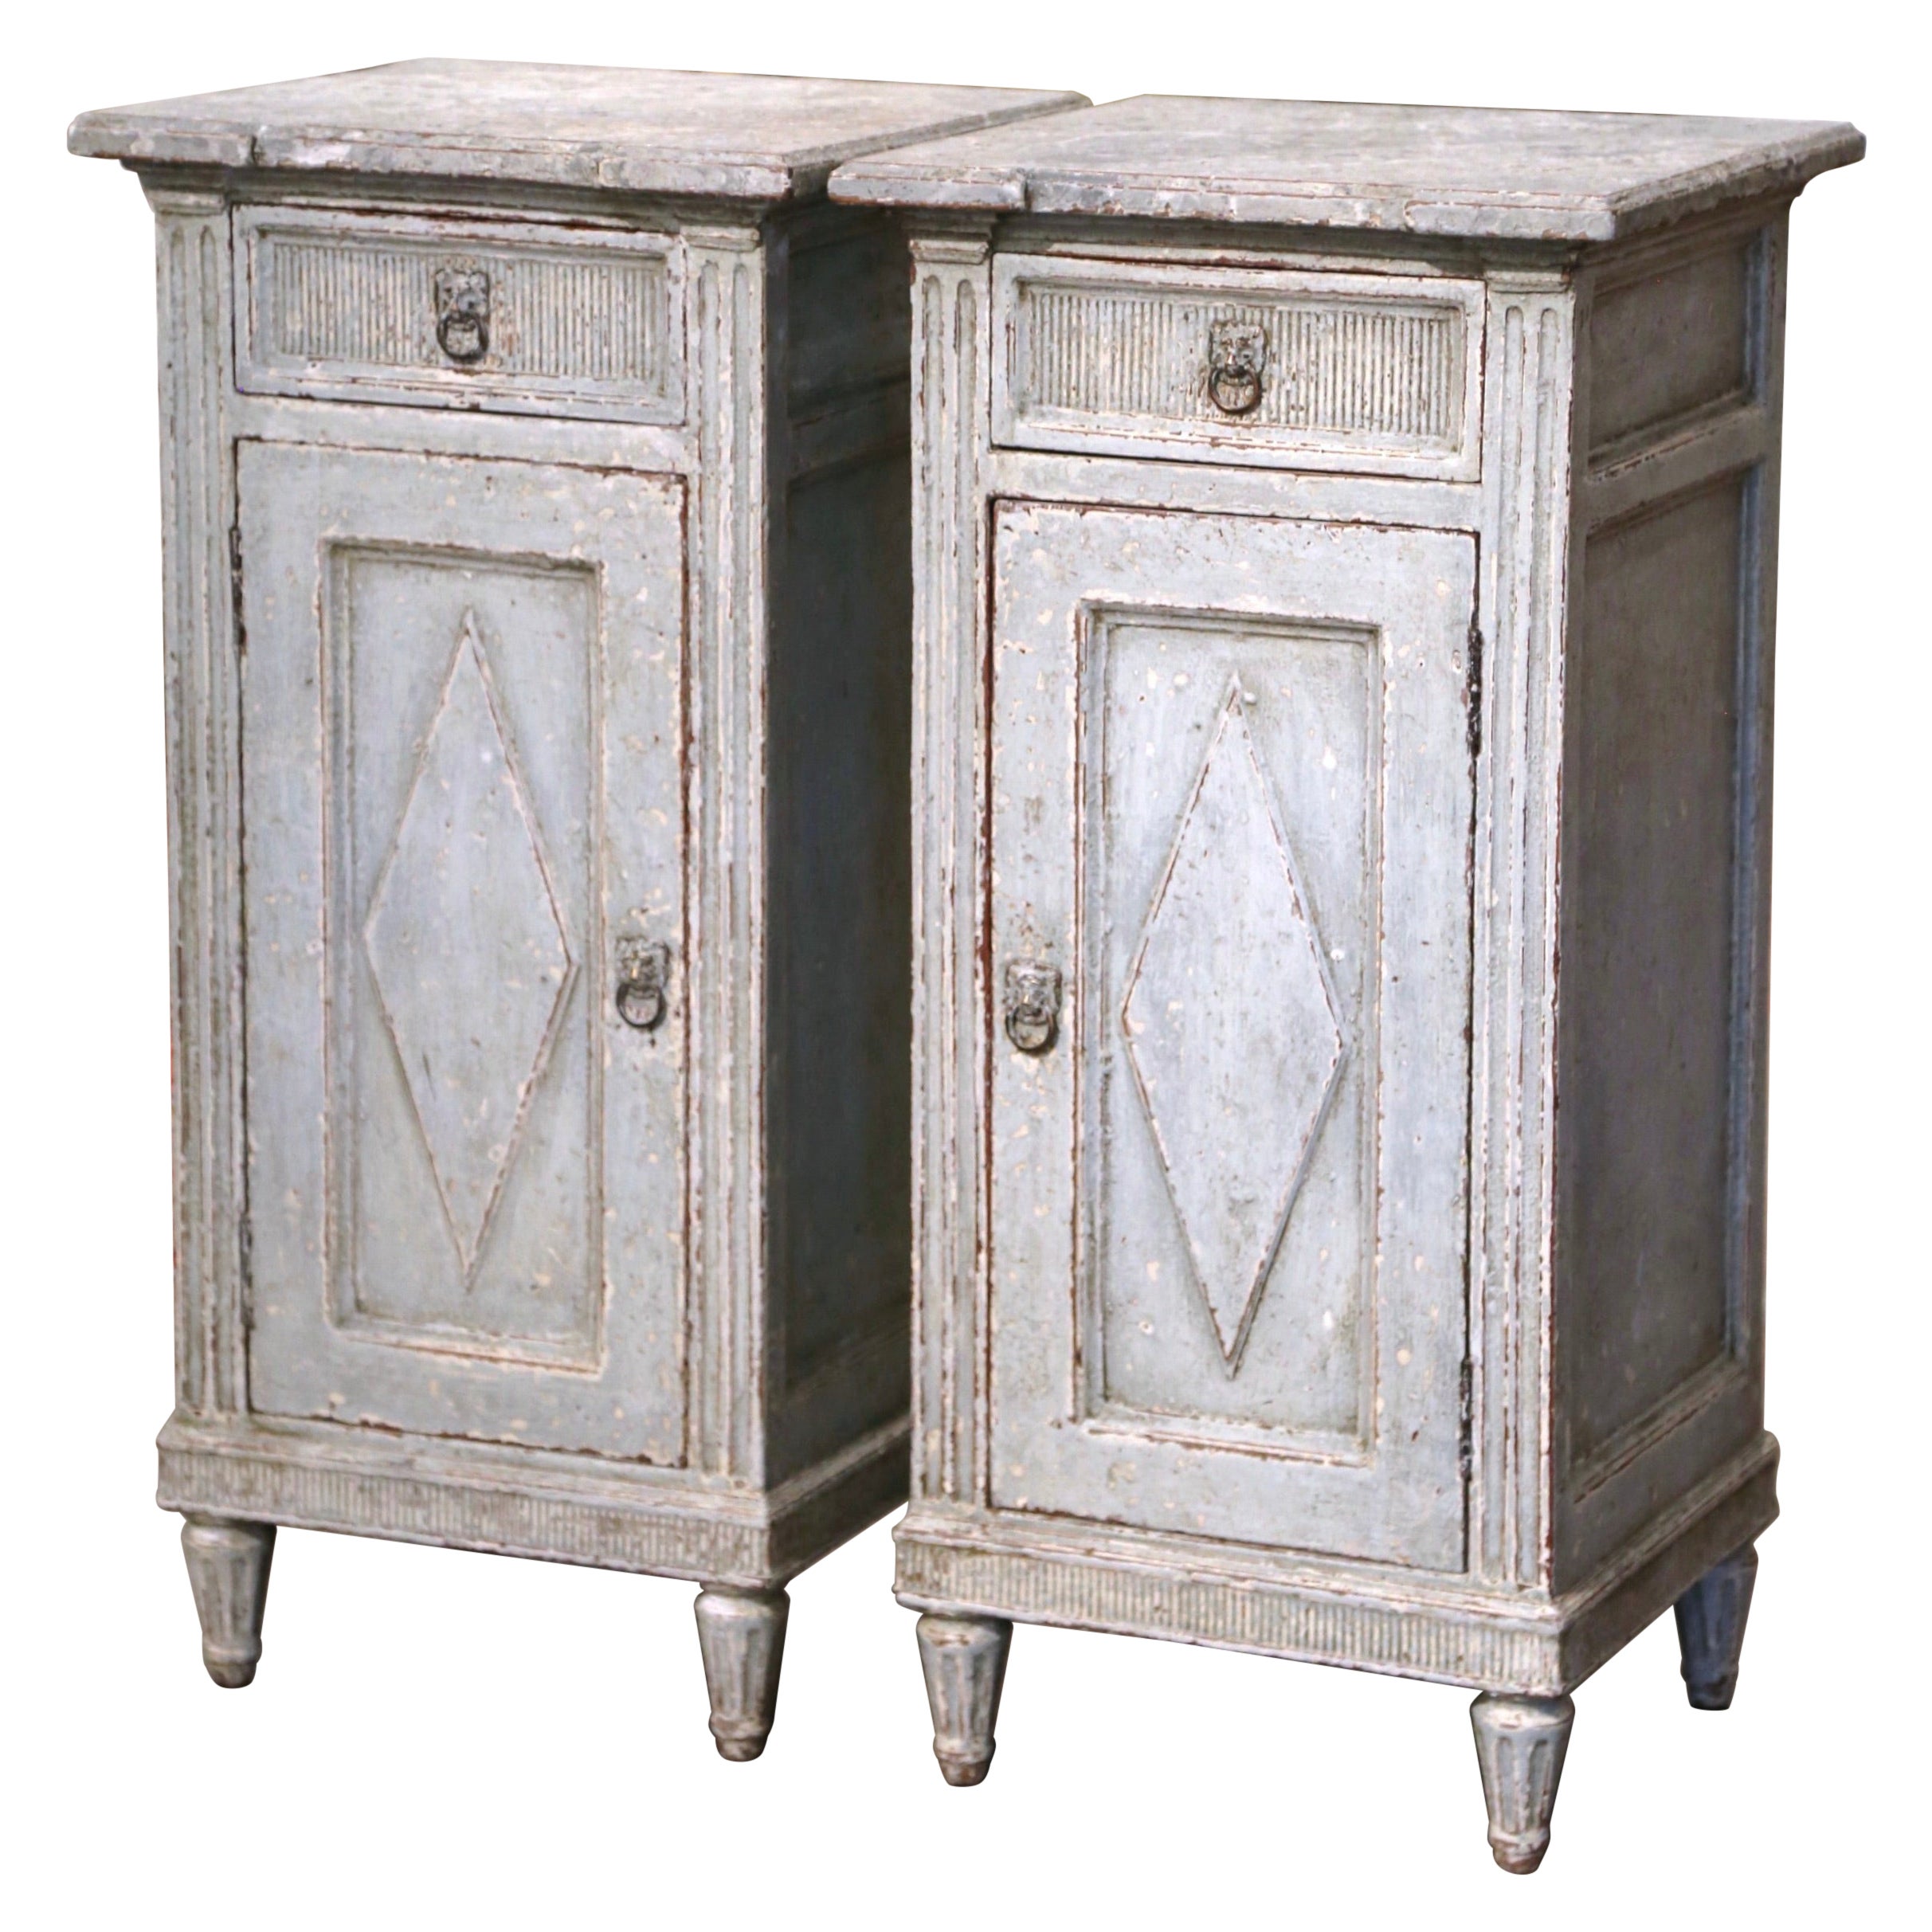 Pair of 19th Century French Louis XVI Carved Painted Nightstands Bedside Tables